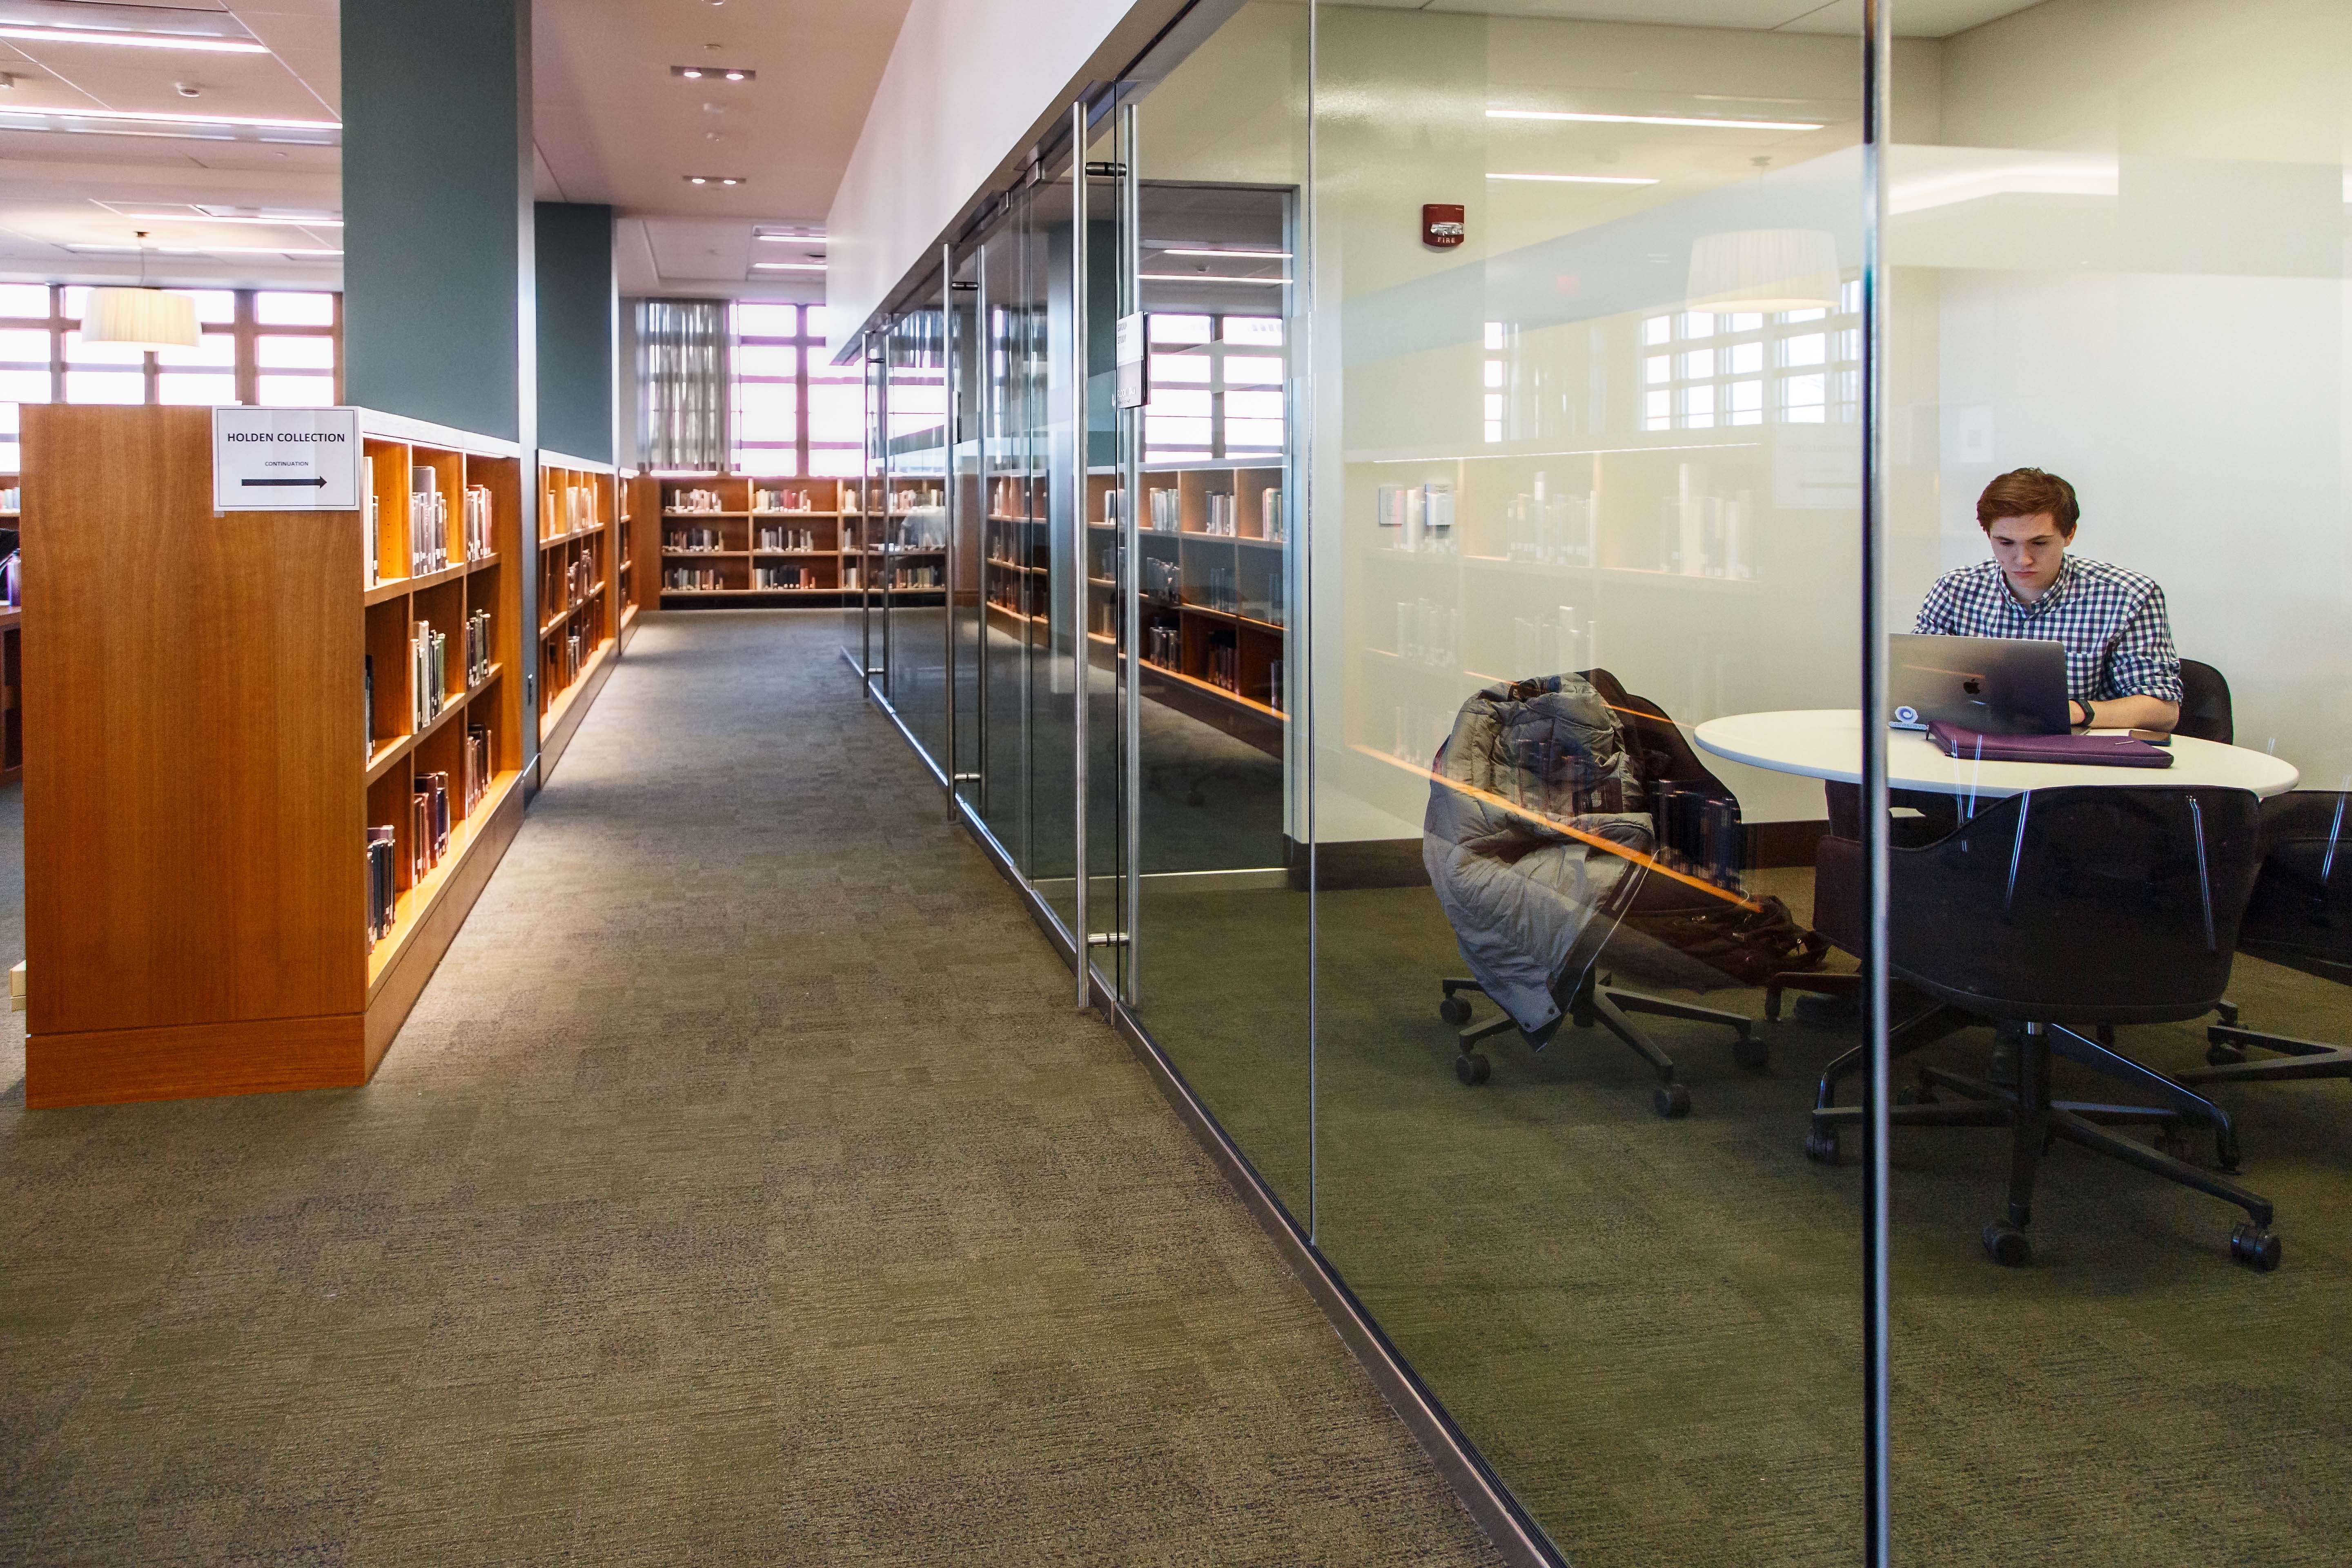 Firestone Library first floor, north side, which includes shelves and group study rooms